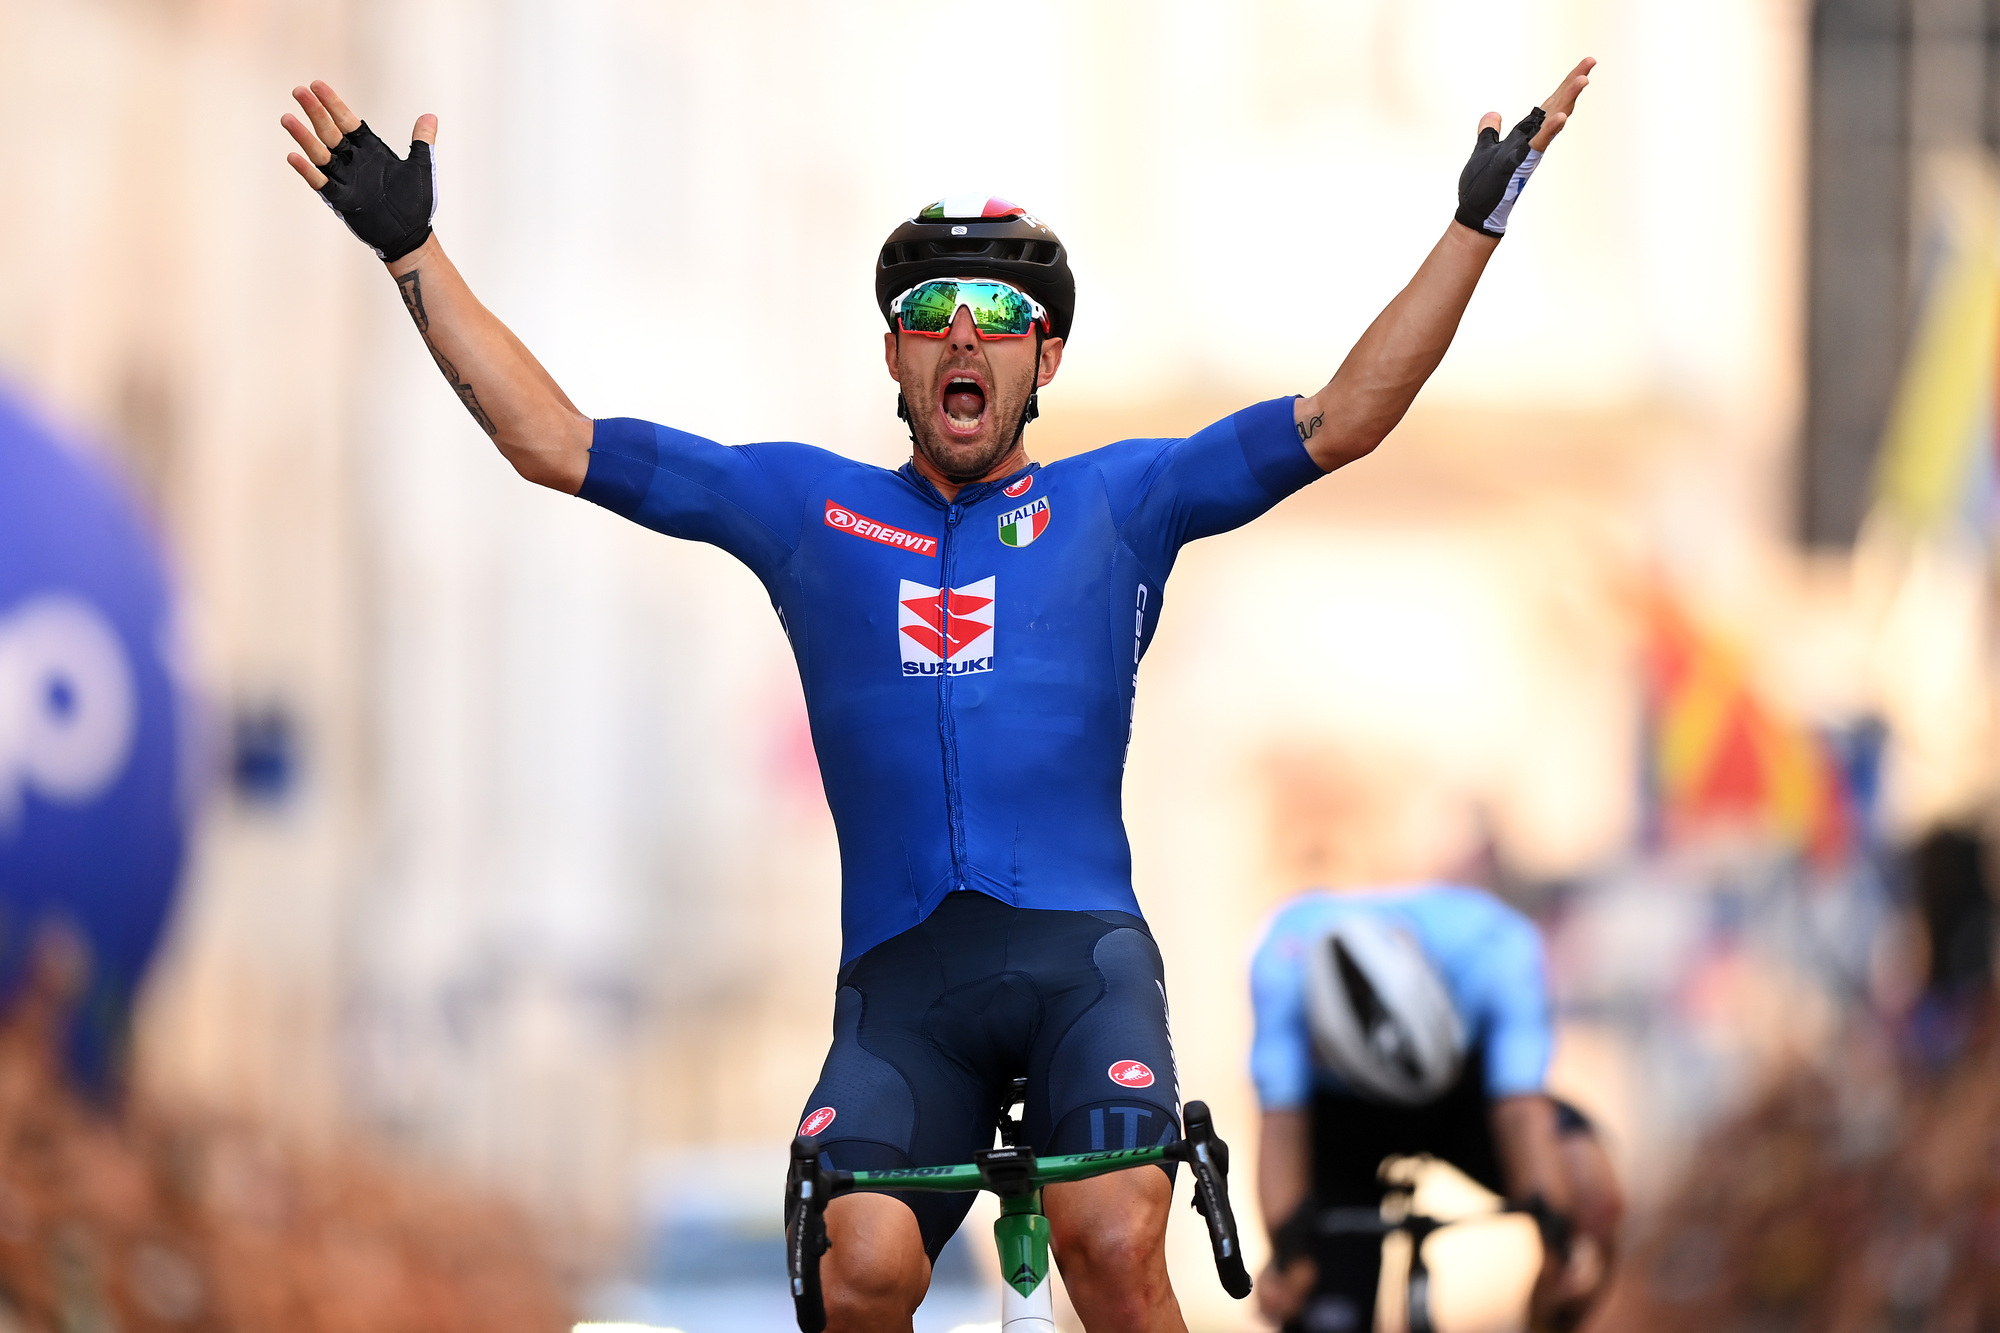 Sonny Colbrelli outwits Remco Evenepoel to become European men's race | Cycling Weekly